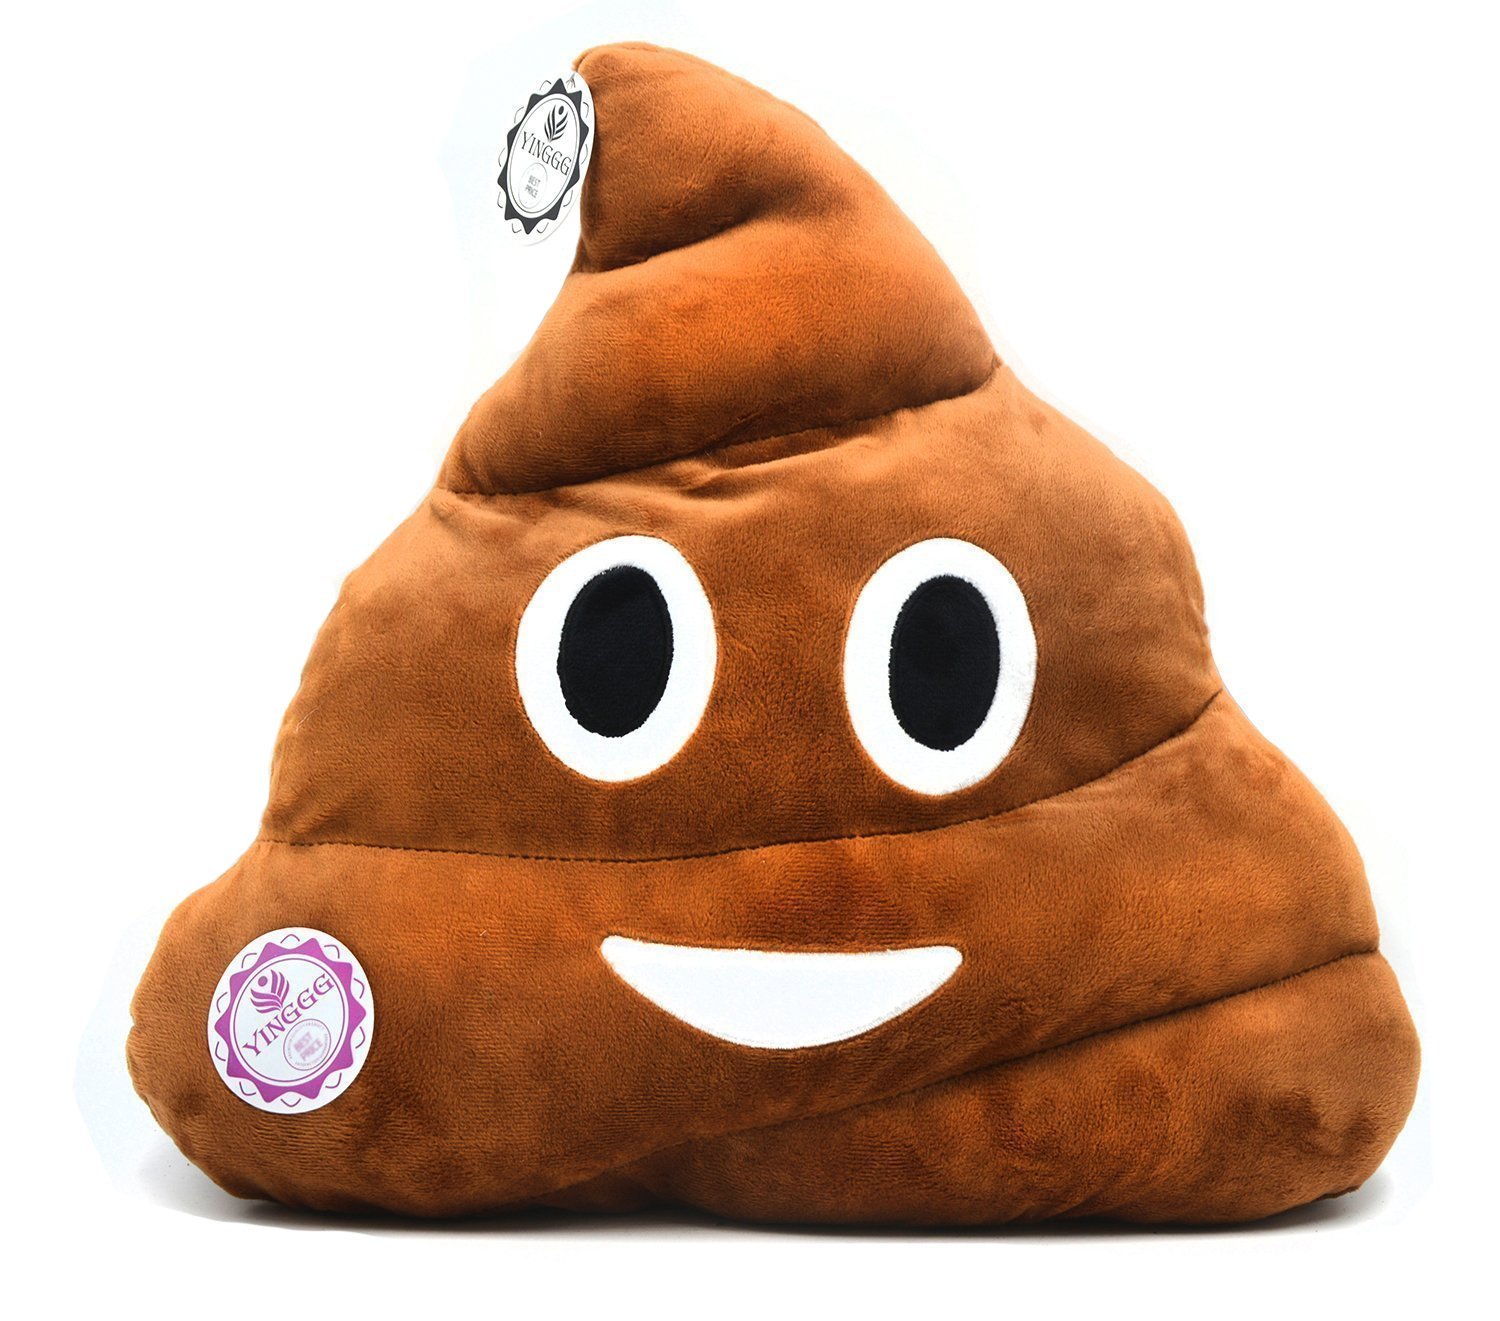 Book Cover YINGGG 32cm Poop Plush Pillow Round Triangle Emotion Cushion Cute Decorative Stuffed Toy Brown Gifts for Kids and Friends